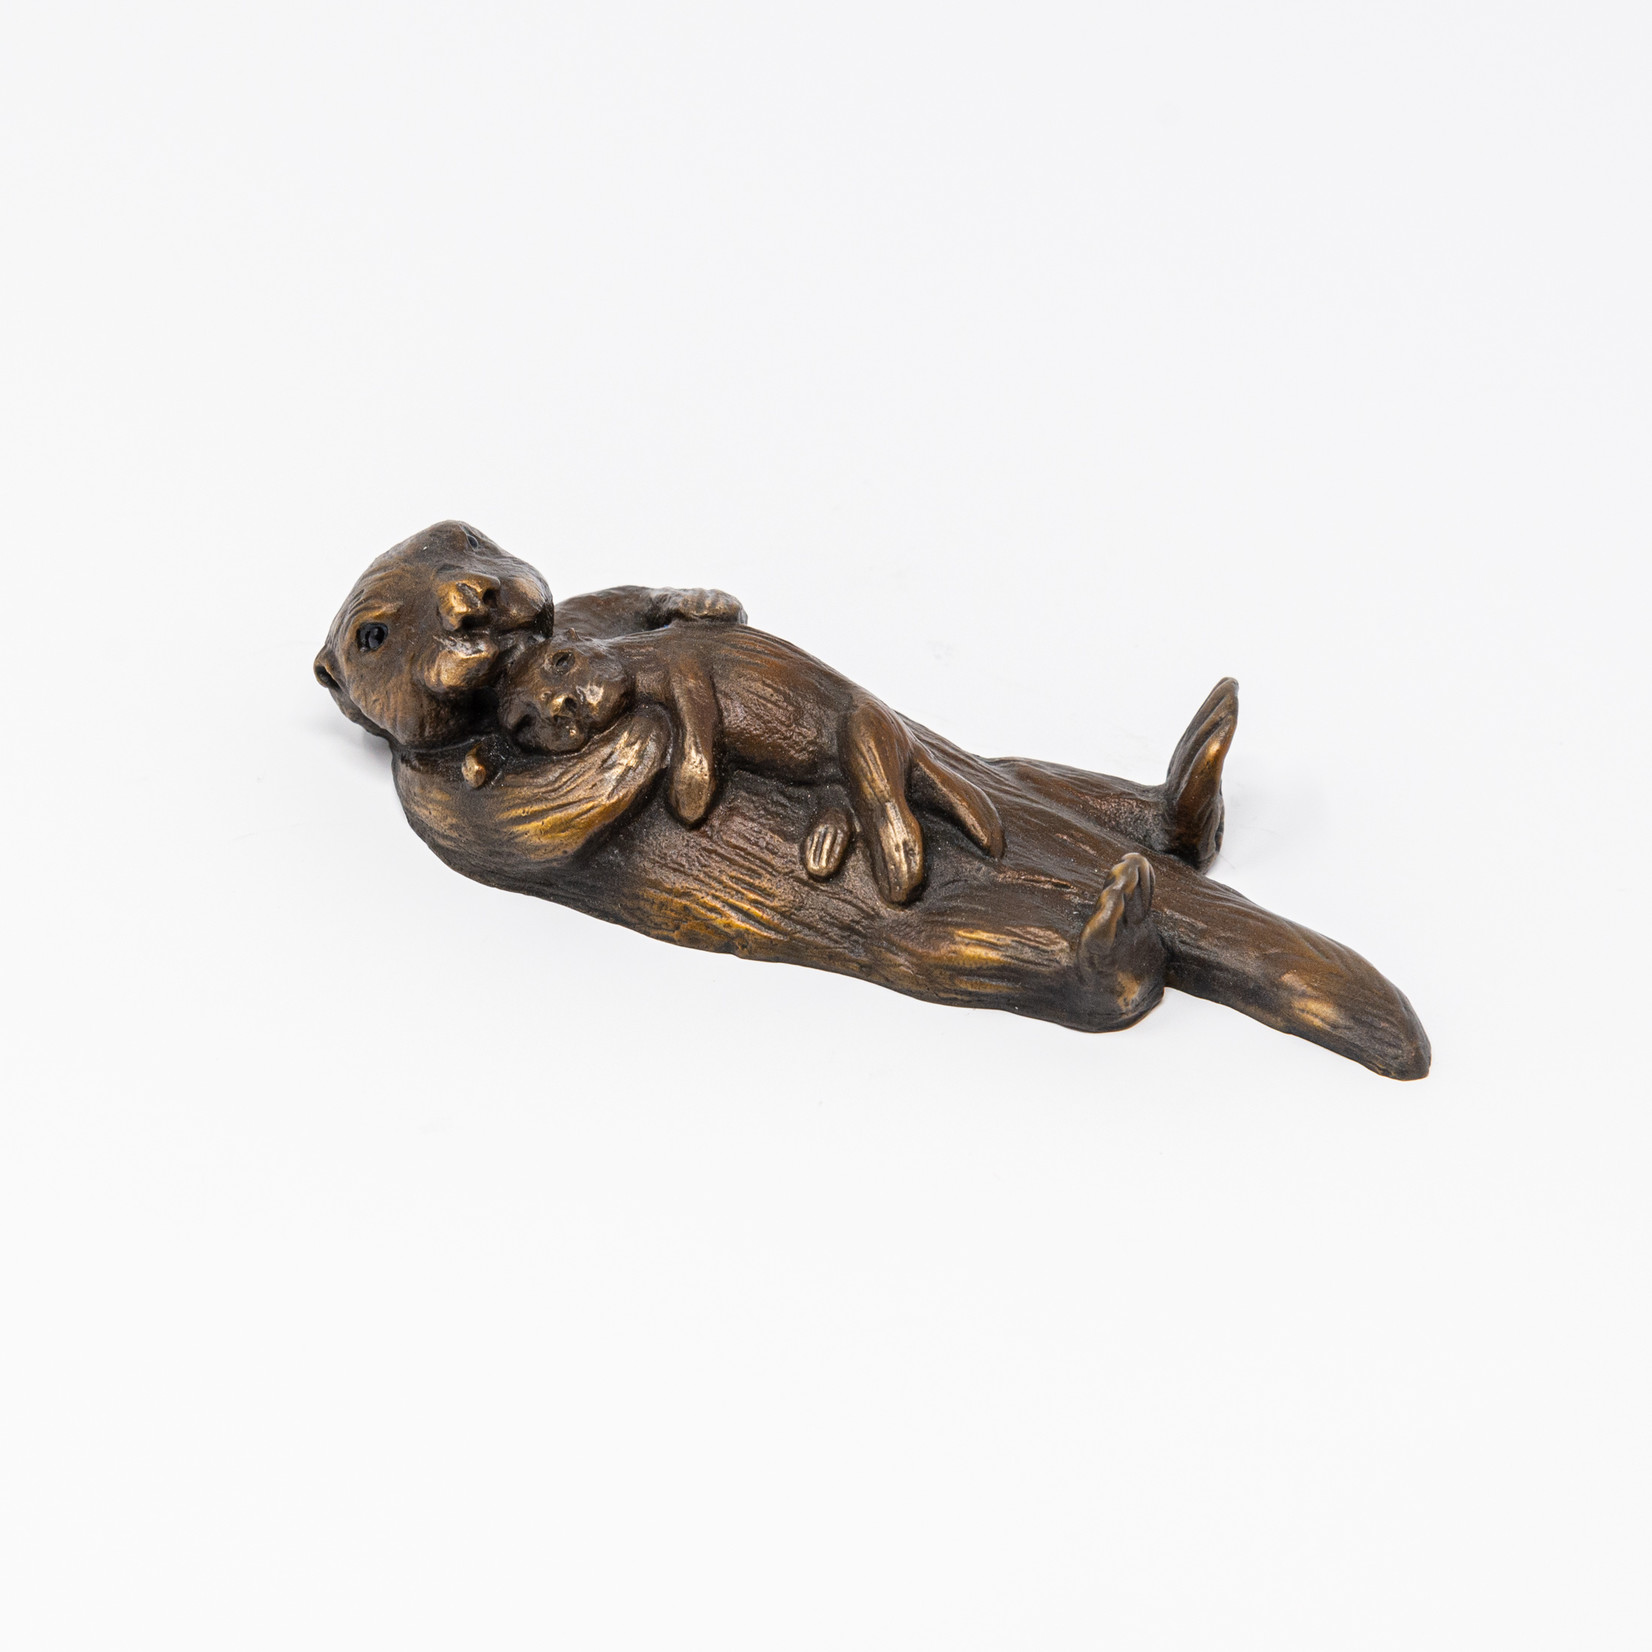 Sculpture by Nathan Scott "Wee" Otter With Baby